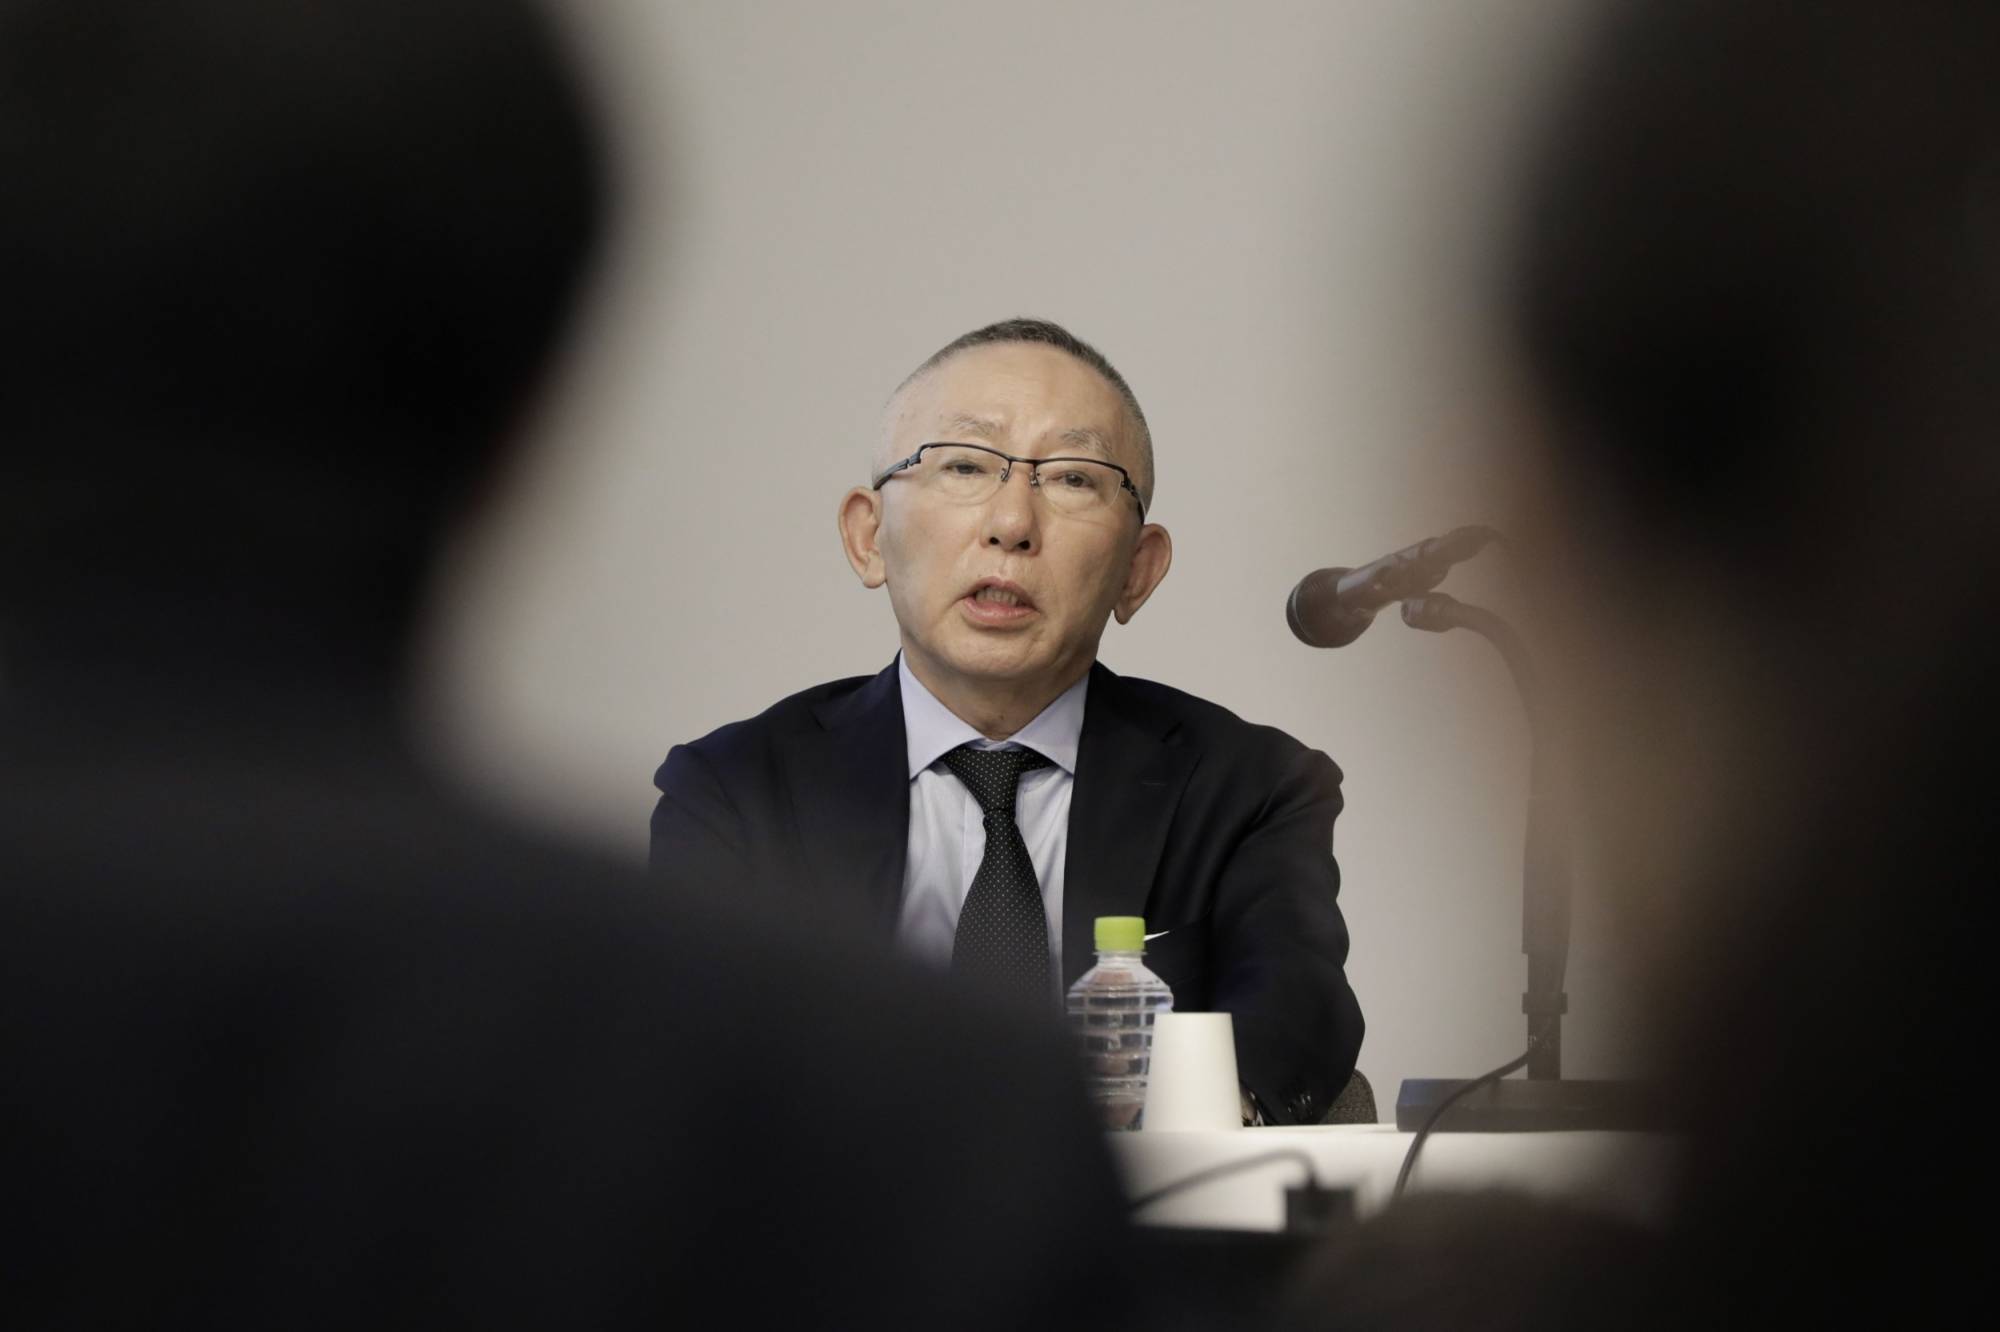 Tadashi Yanai, chairman and chief executive officer of Fast Retailing Co., speaks during a news conference in Tokyo on Thursday. | BLOOMBERG